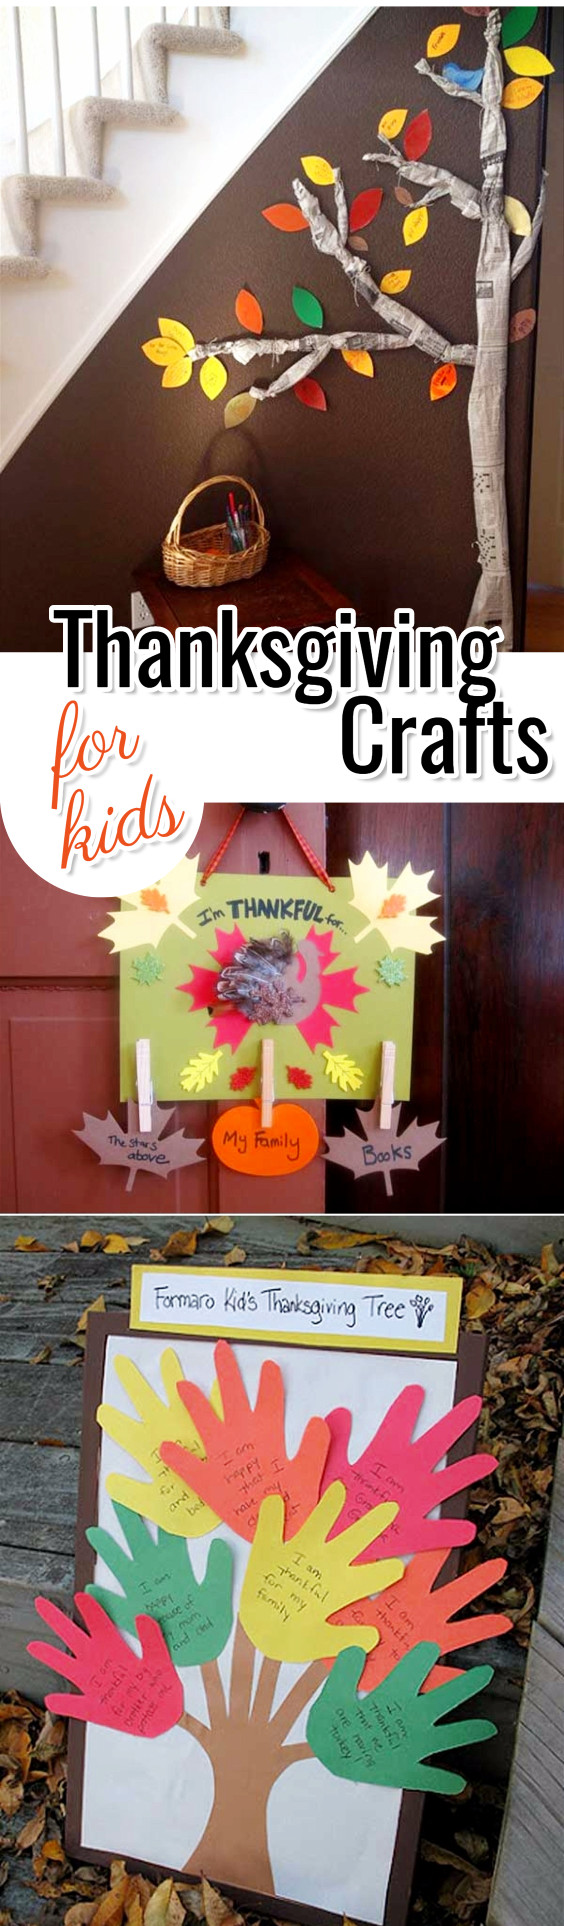 Thanksgiving Crafts for Kids - Fun and Easy Kids Craft Ideas for Thanksgiving